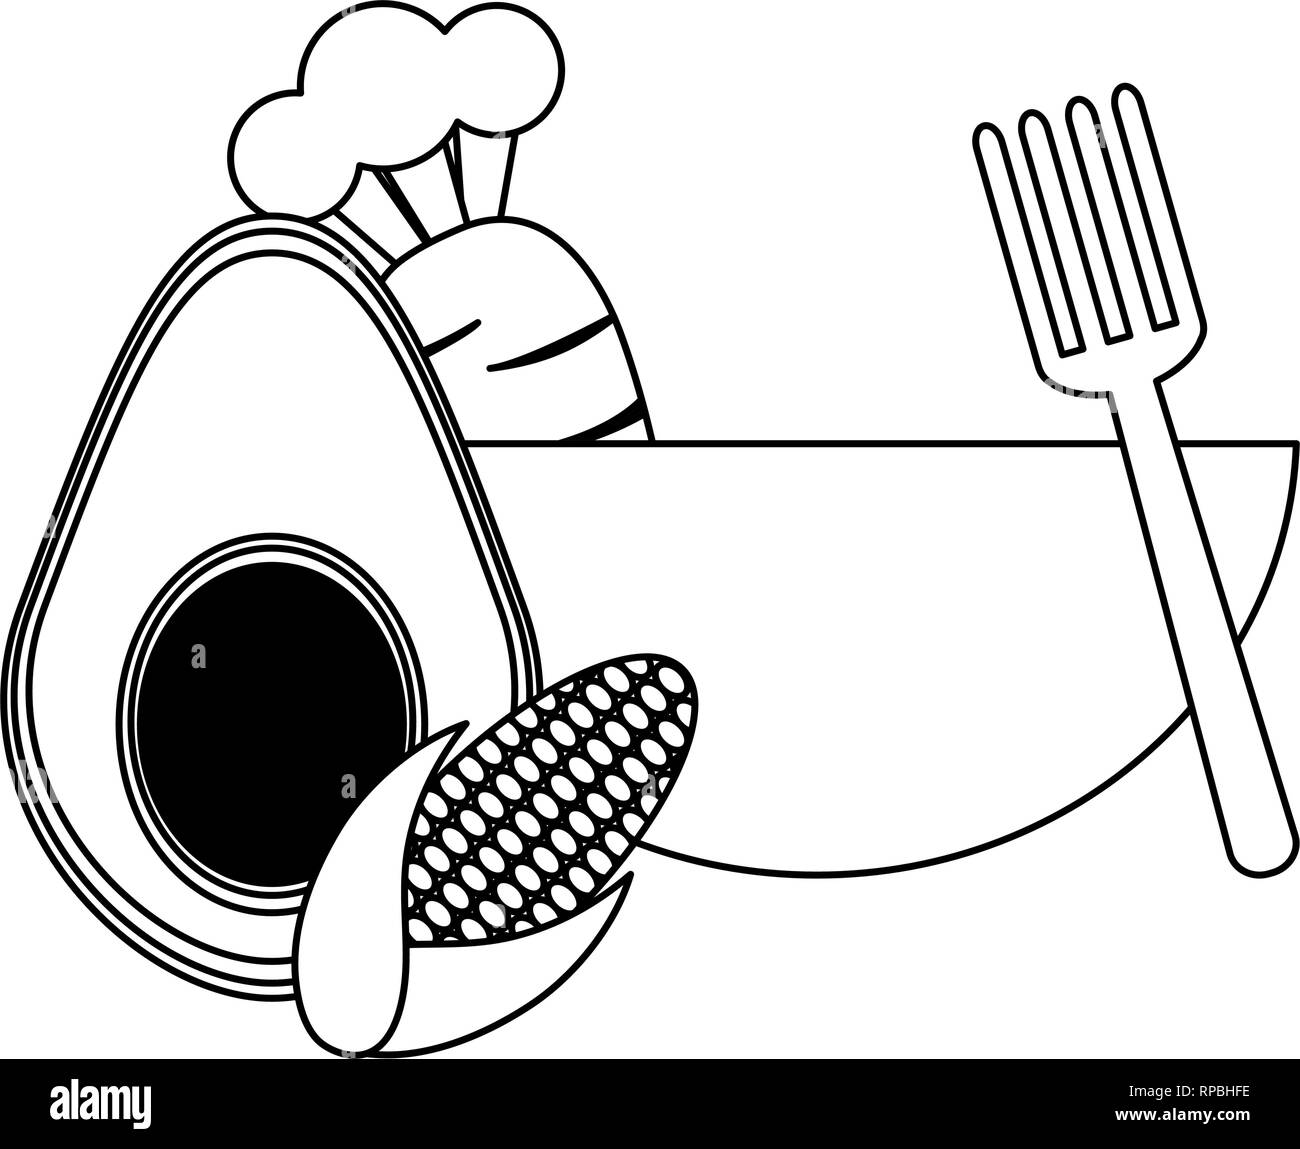 Healthy vegetables food black and white Stock Vector